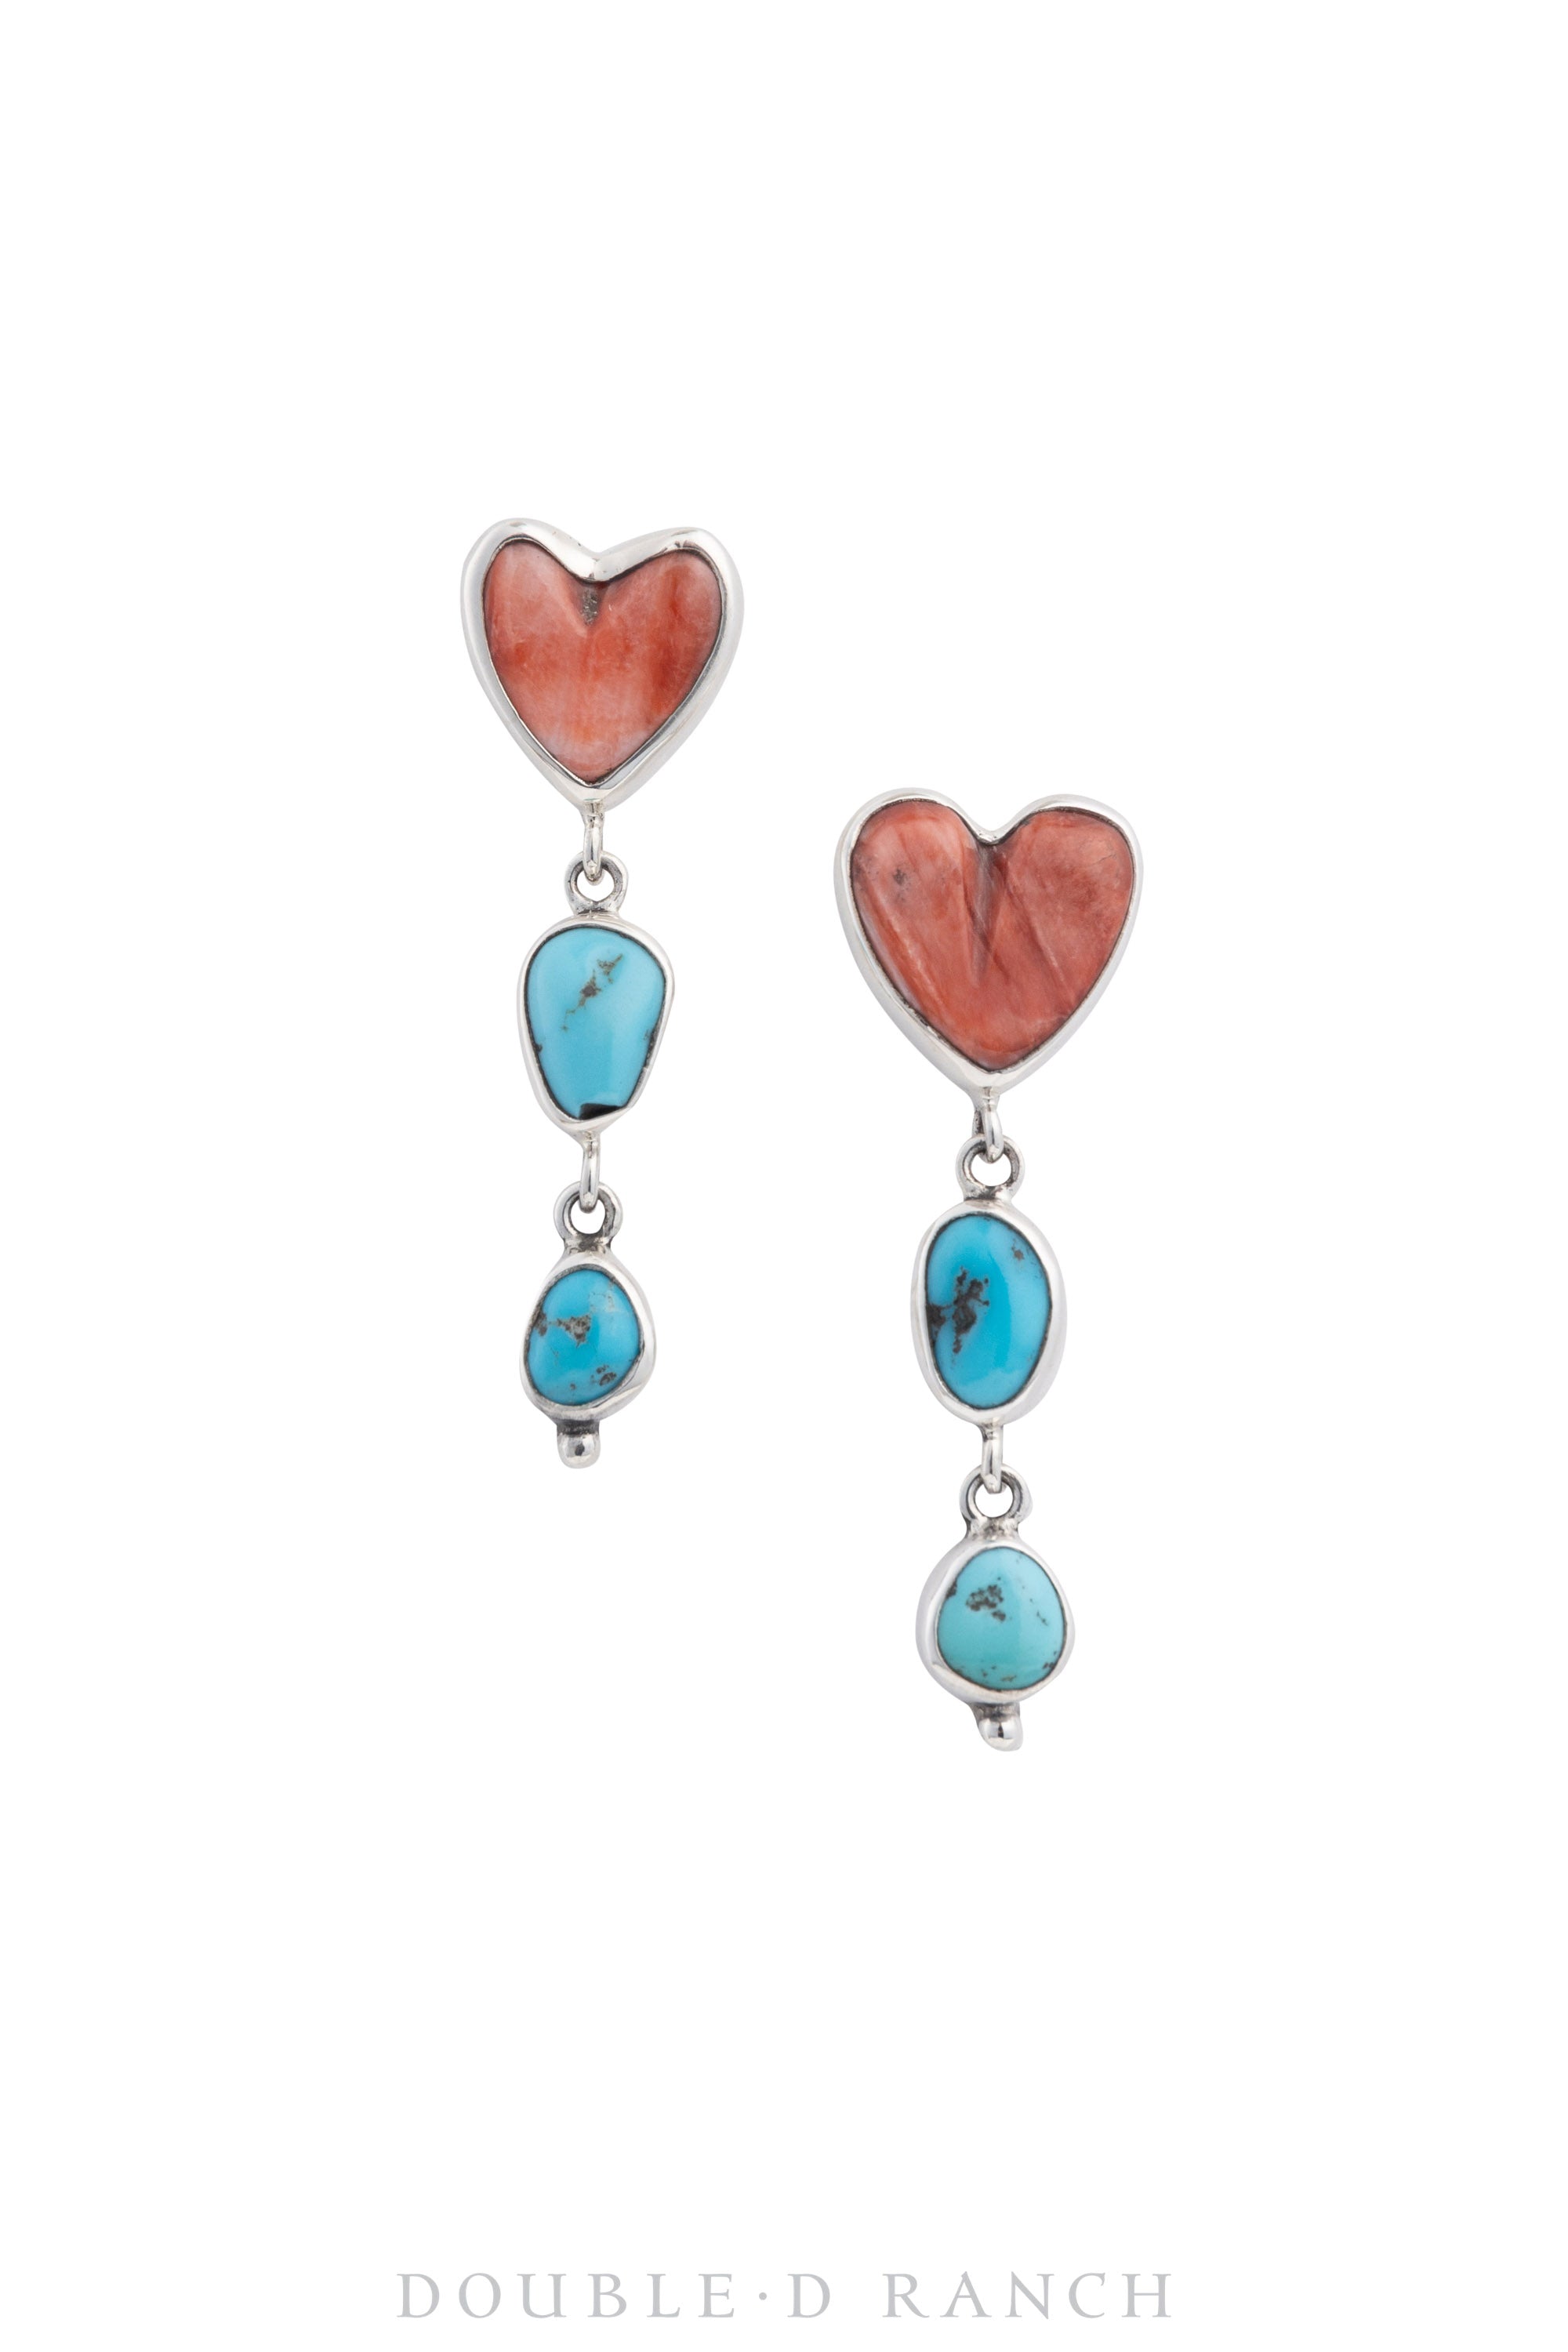 Earrings, Dangles, Orange Spiny Oyster & Turquoise, Heart,  Hallmark, Contemporary, 1499